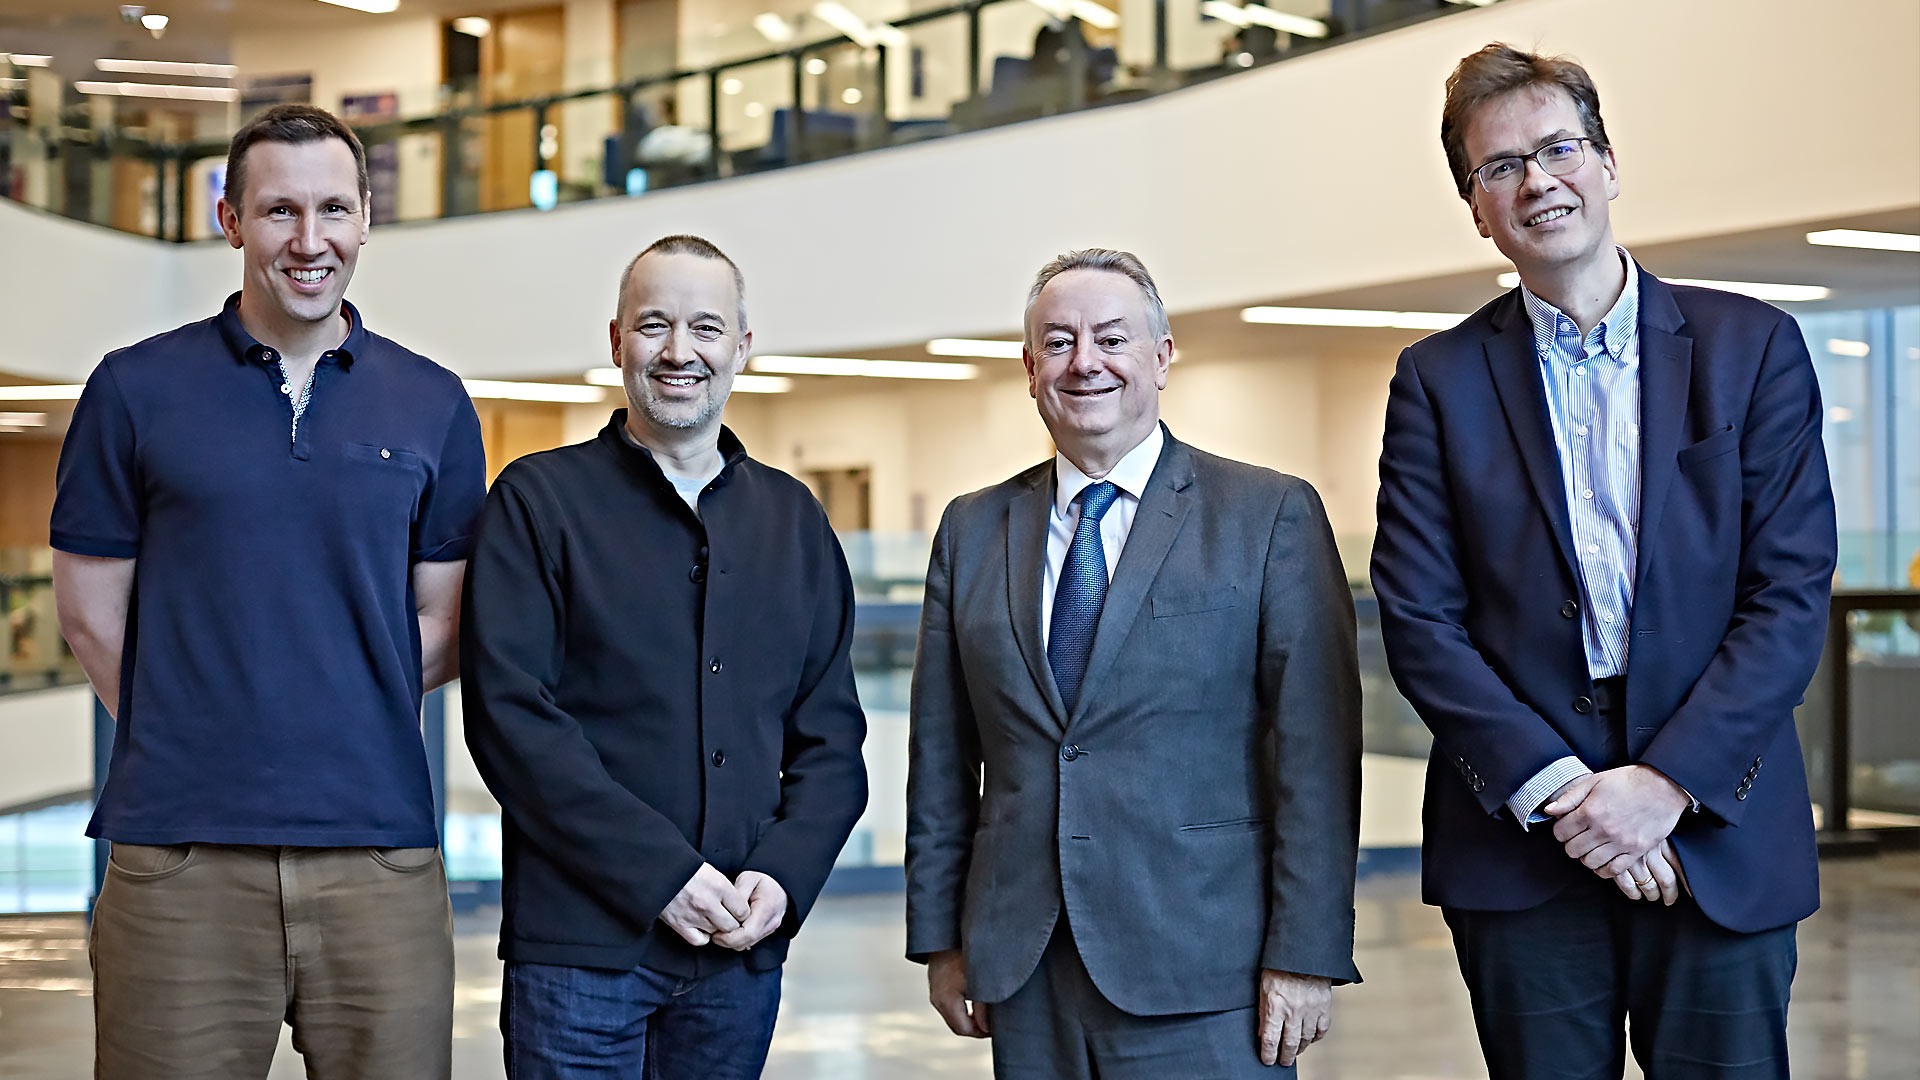 John Warhurst (centre left) and the University's Vice Chancellor Professor Bob Cryan (centre right) with Stewart Worthy (far left) and Thomas Schmidt (far right)